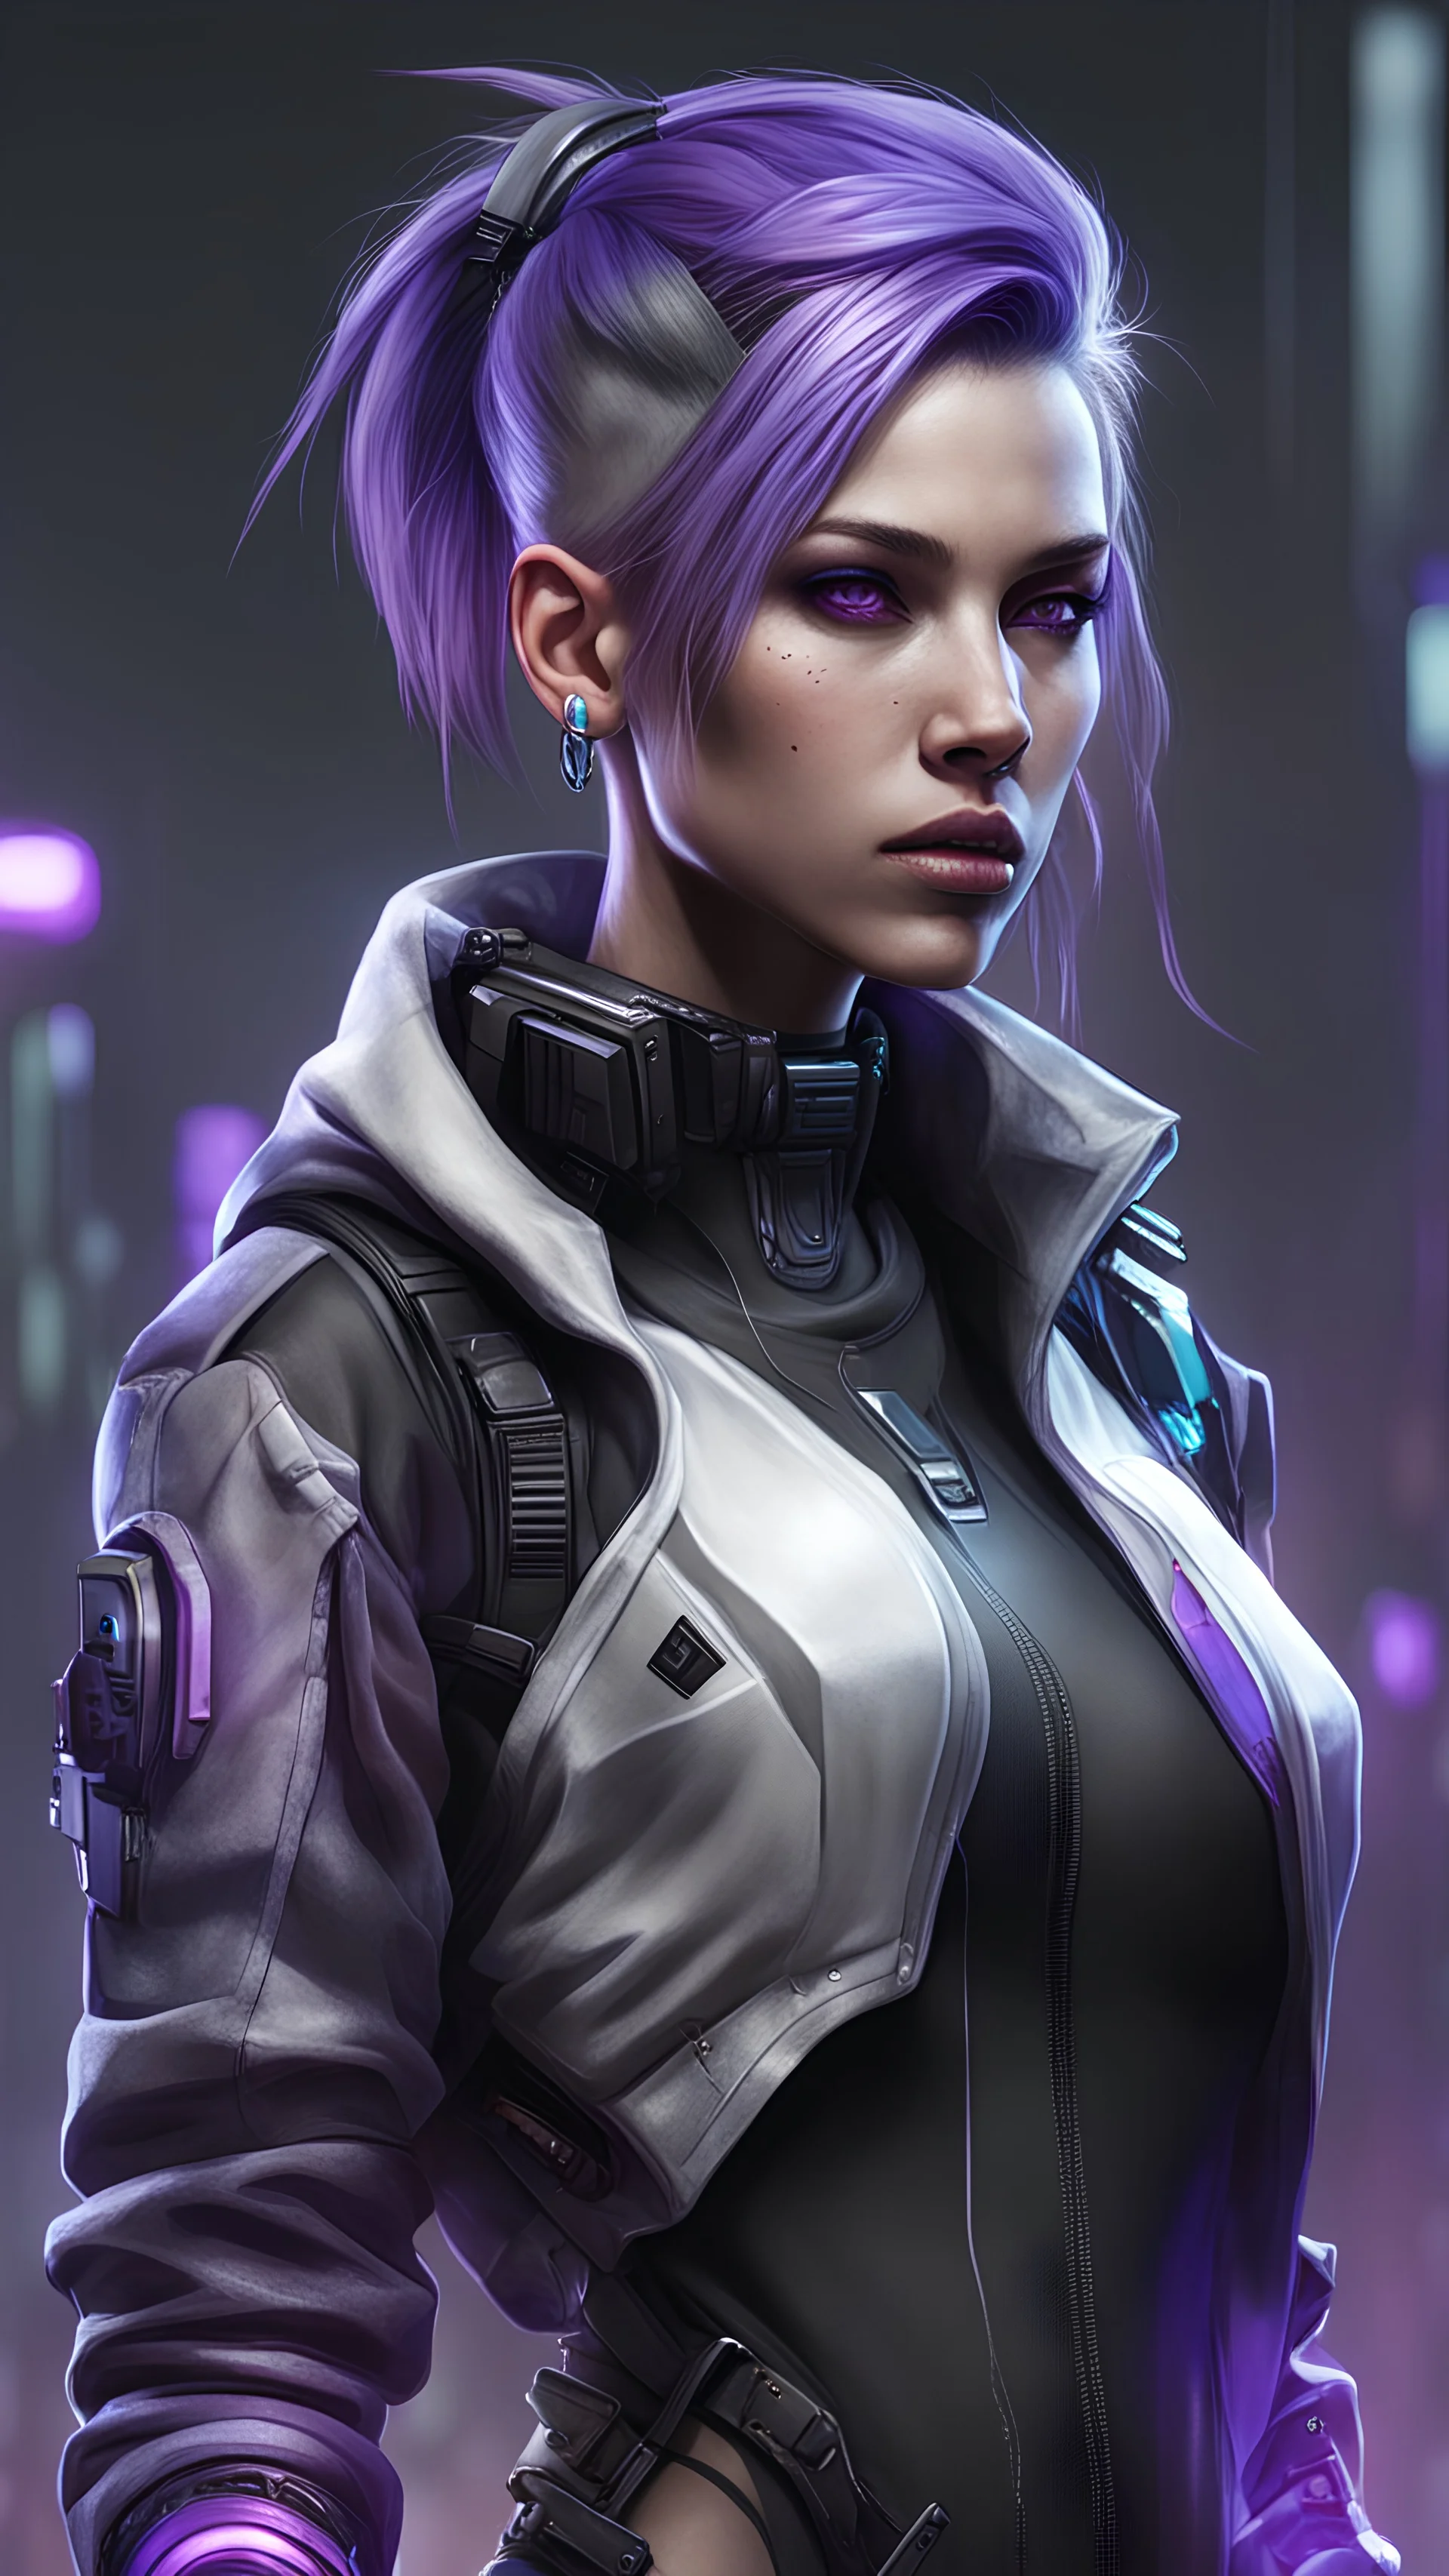 Cyberpunk female with black, grey, white, and purple coloration and clothing in a realistic style